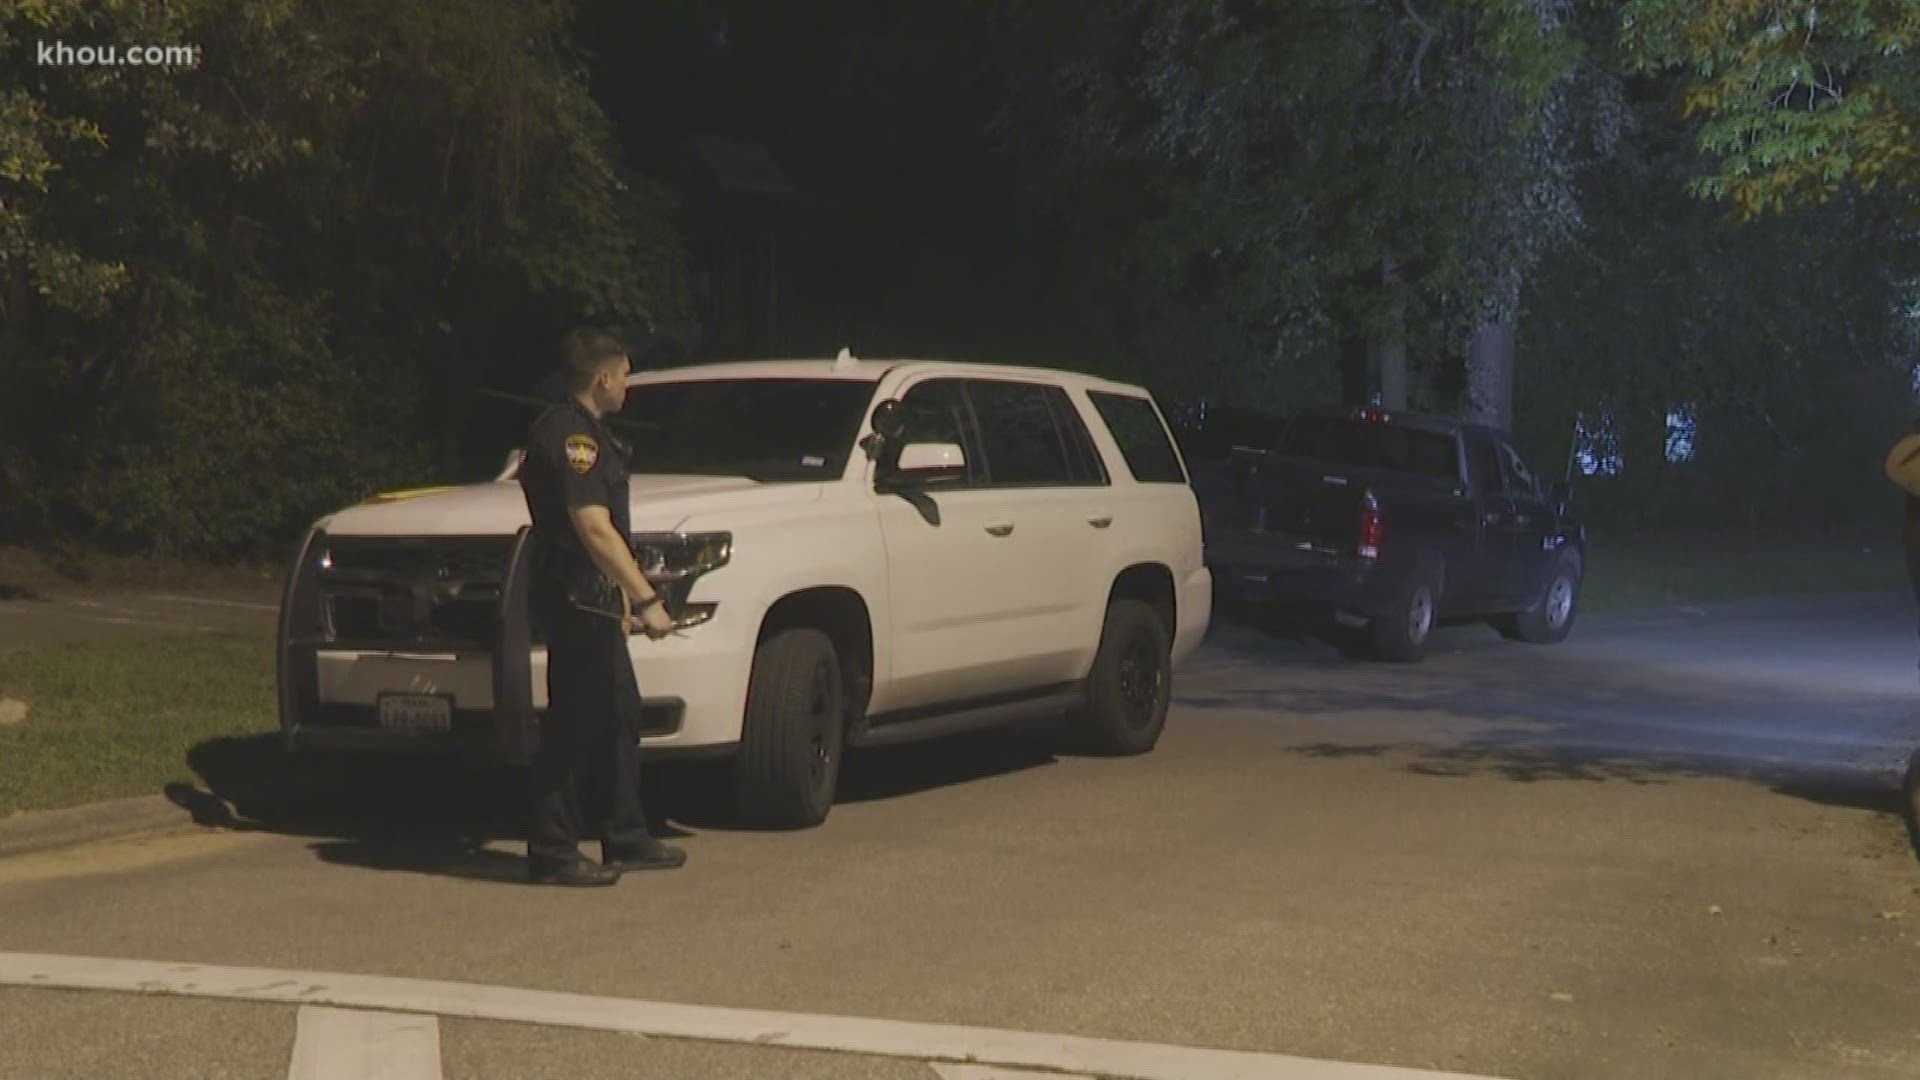 A teen is being questioned after a man was shot Thursday night at a park in The Woodlands.